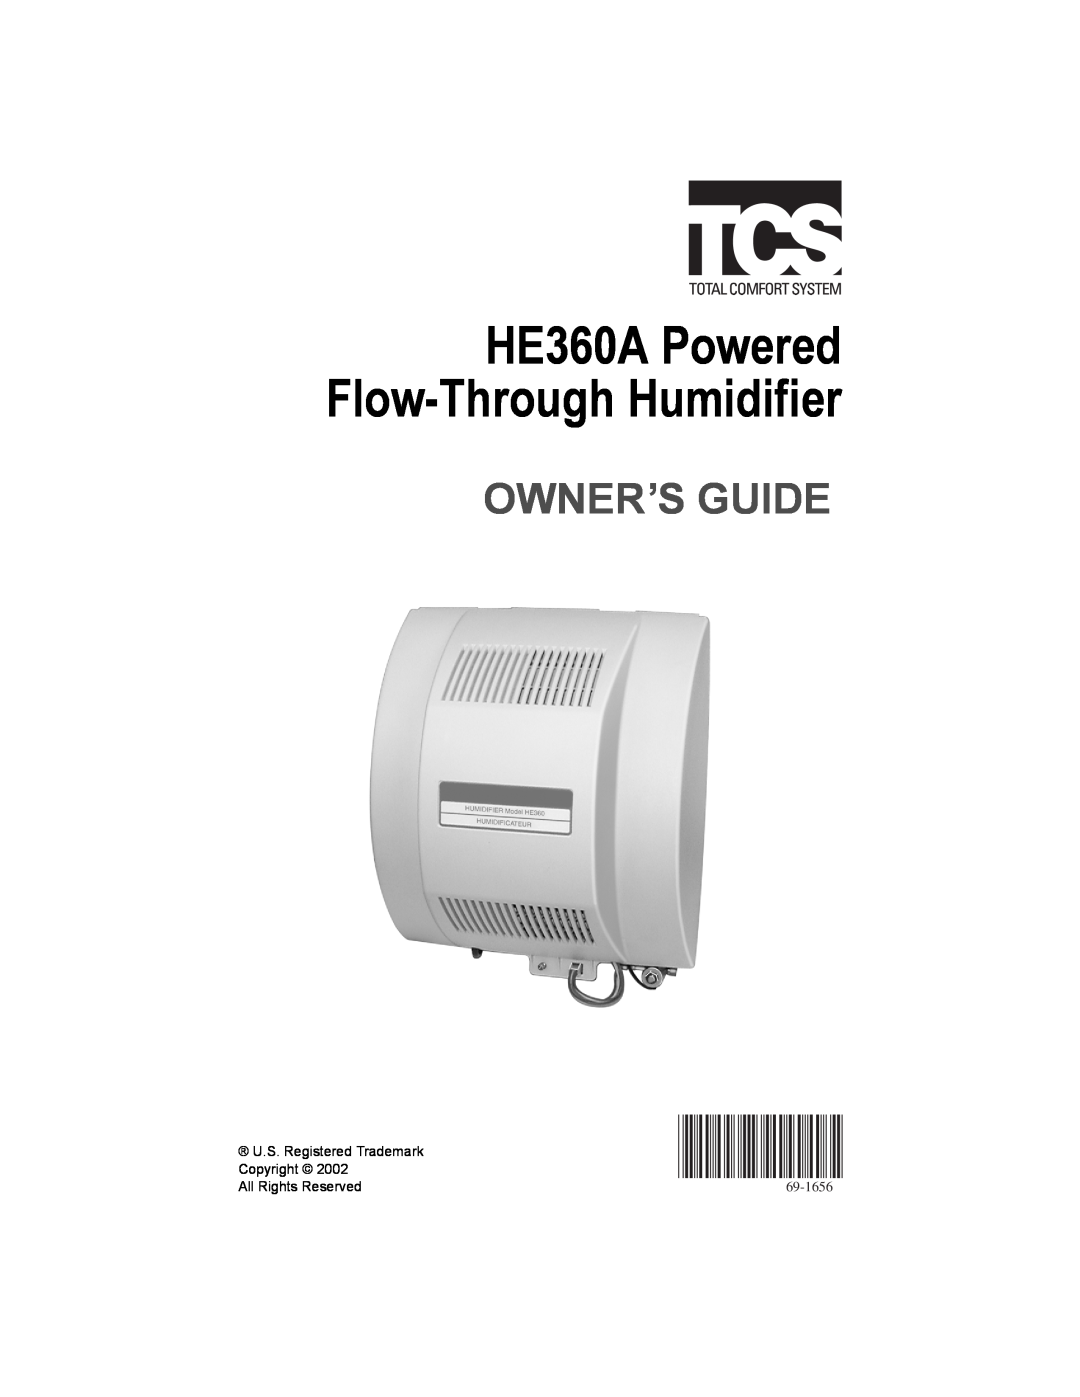 Honeywell manual HE360A Powered Flow-ThroughHumidifier, Owner’S Guide, U.S. Registered Trademark Copyright, 69-1656 